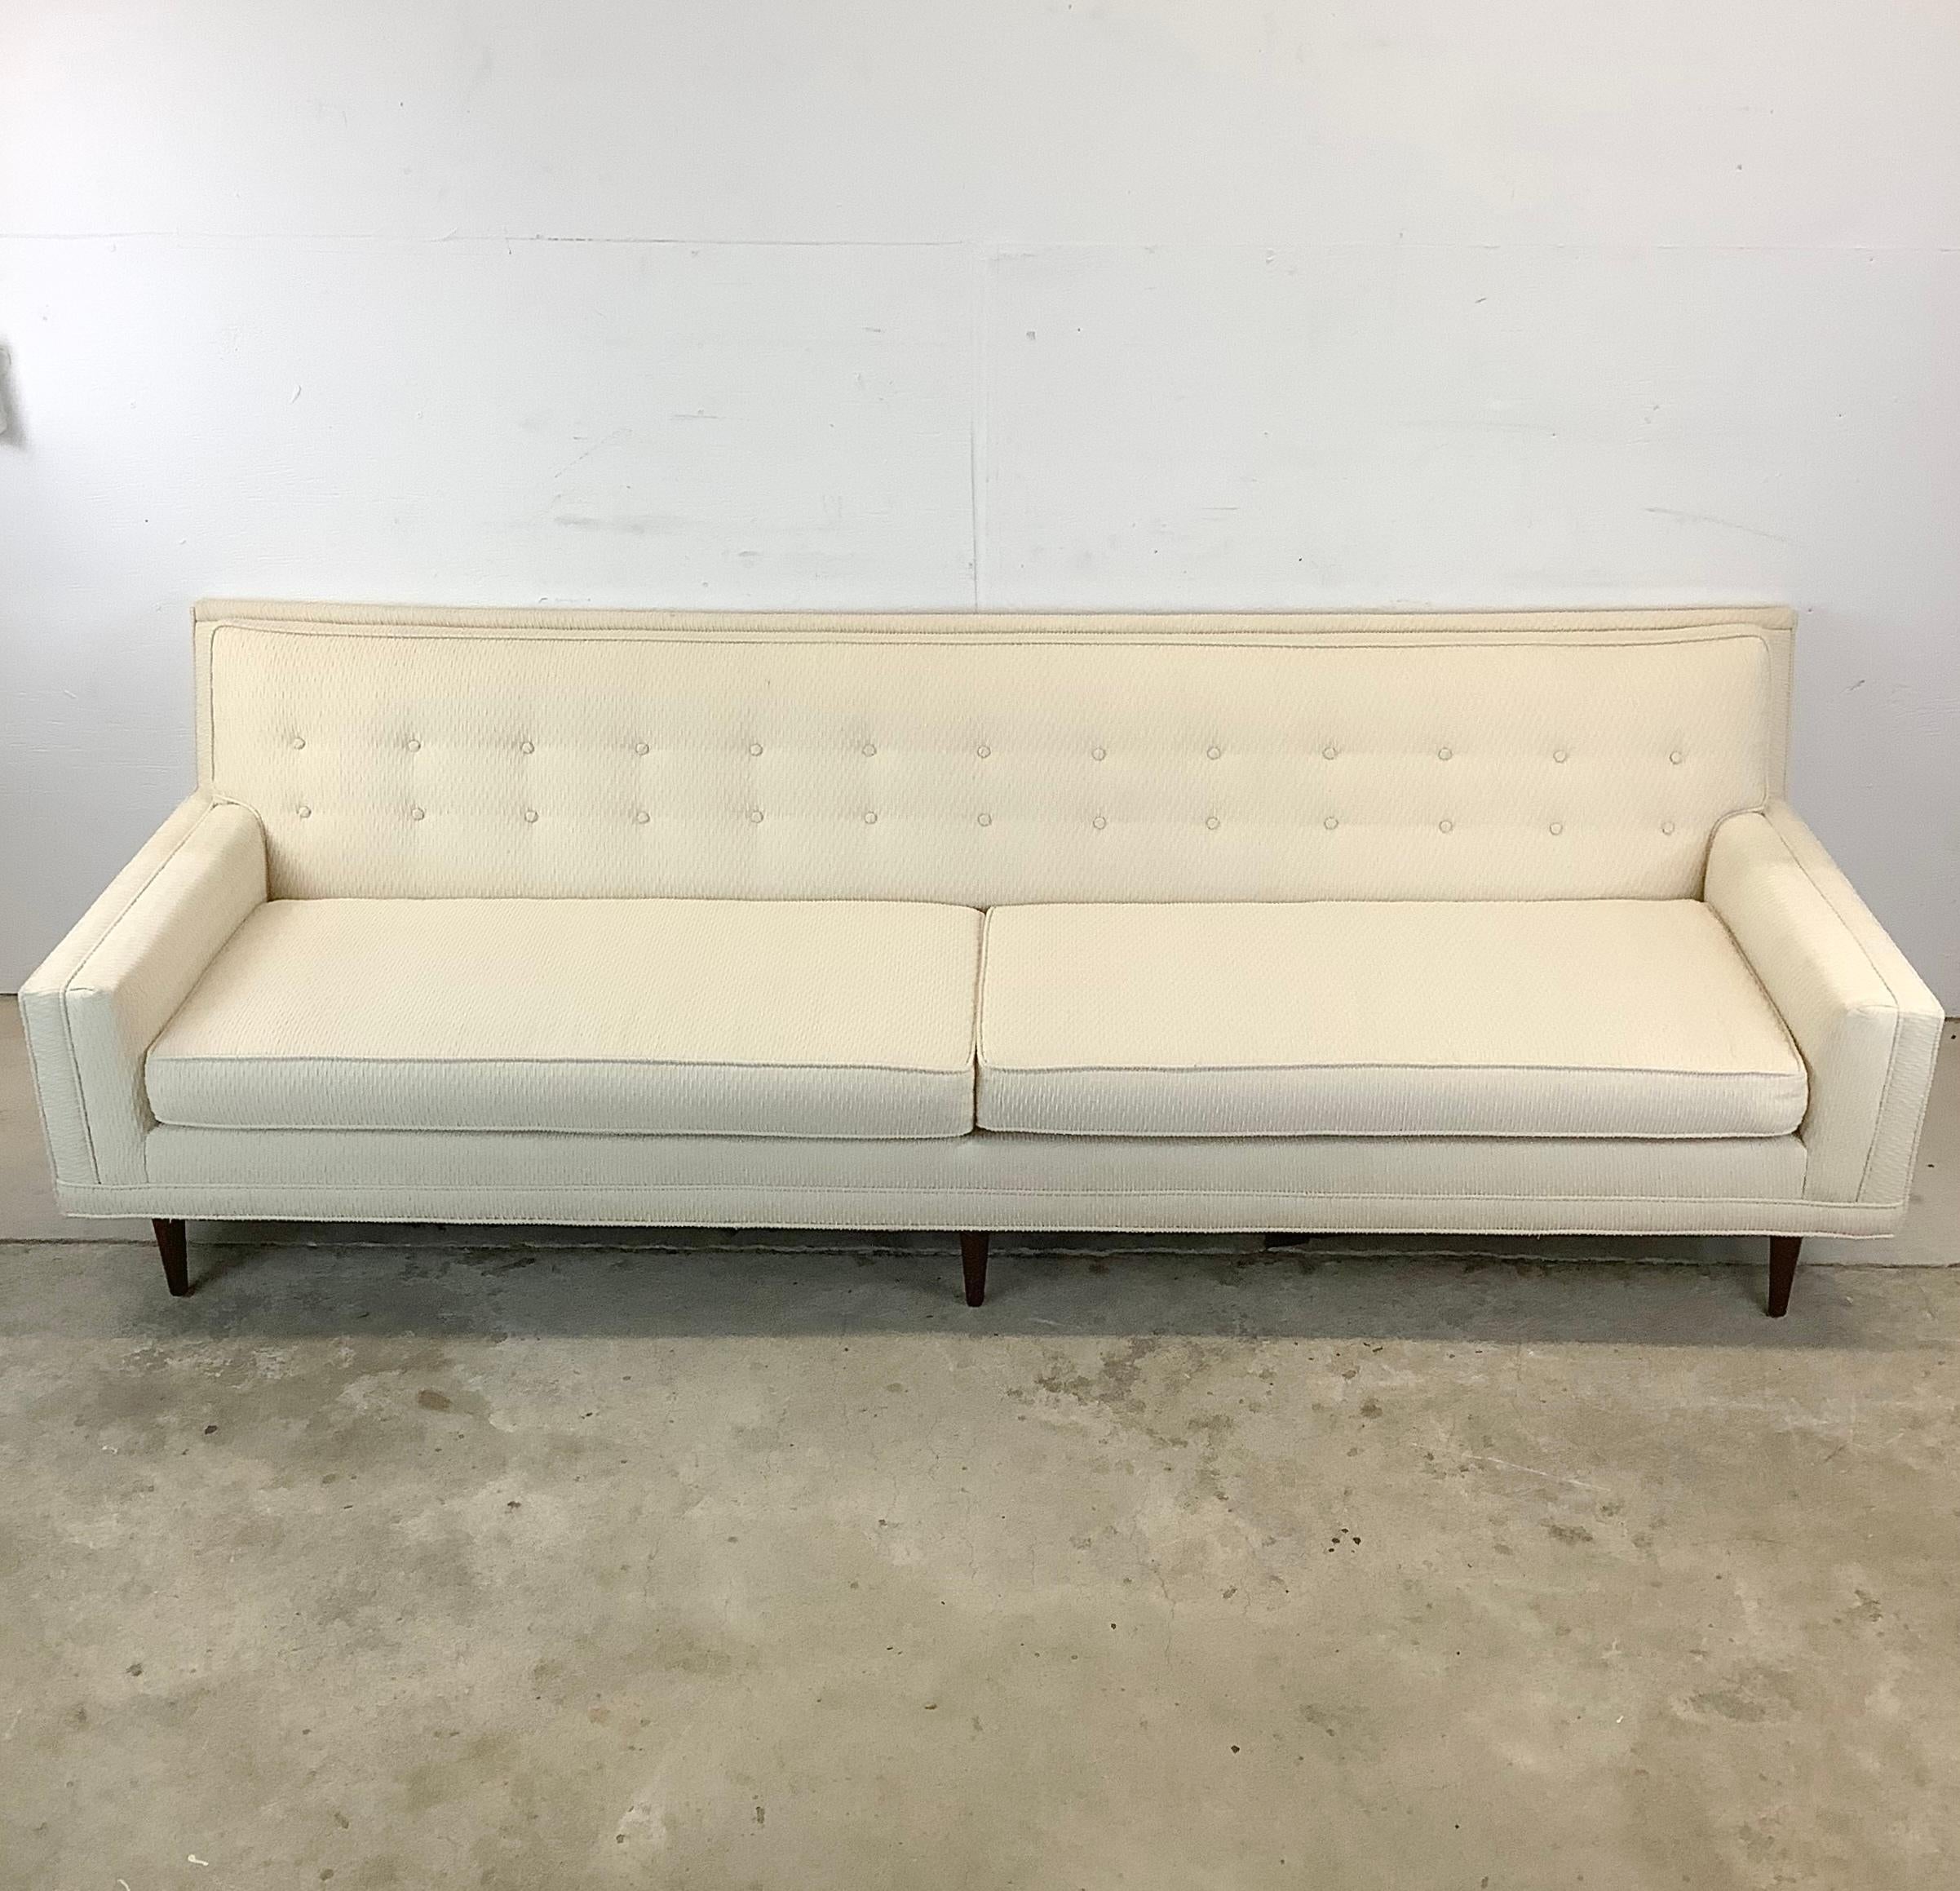 This 8ft Mid-Century Modern Sofa makes a luxurious centerpiece that captures the essence of timeless design. Crafted with exquisite attention to detail, this vintage Edward Wormley style sofa exudes the iconic elegance of mid-century modernism,